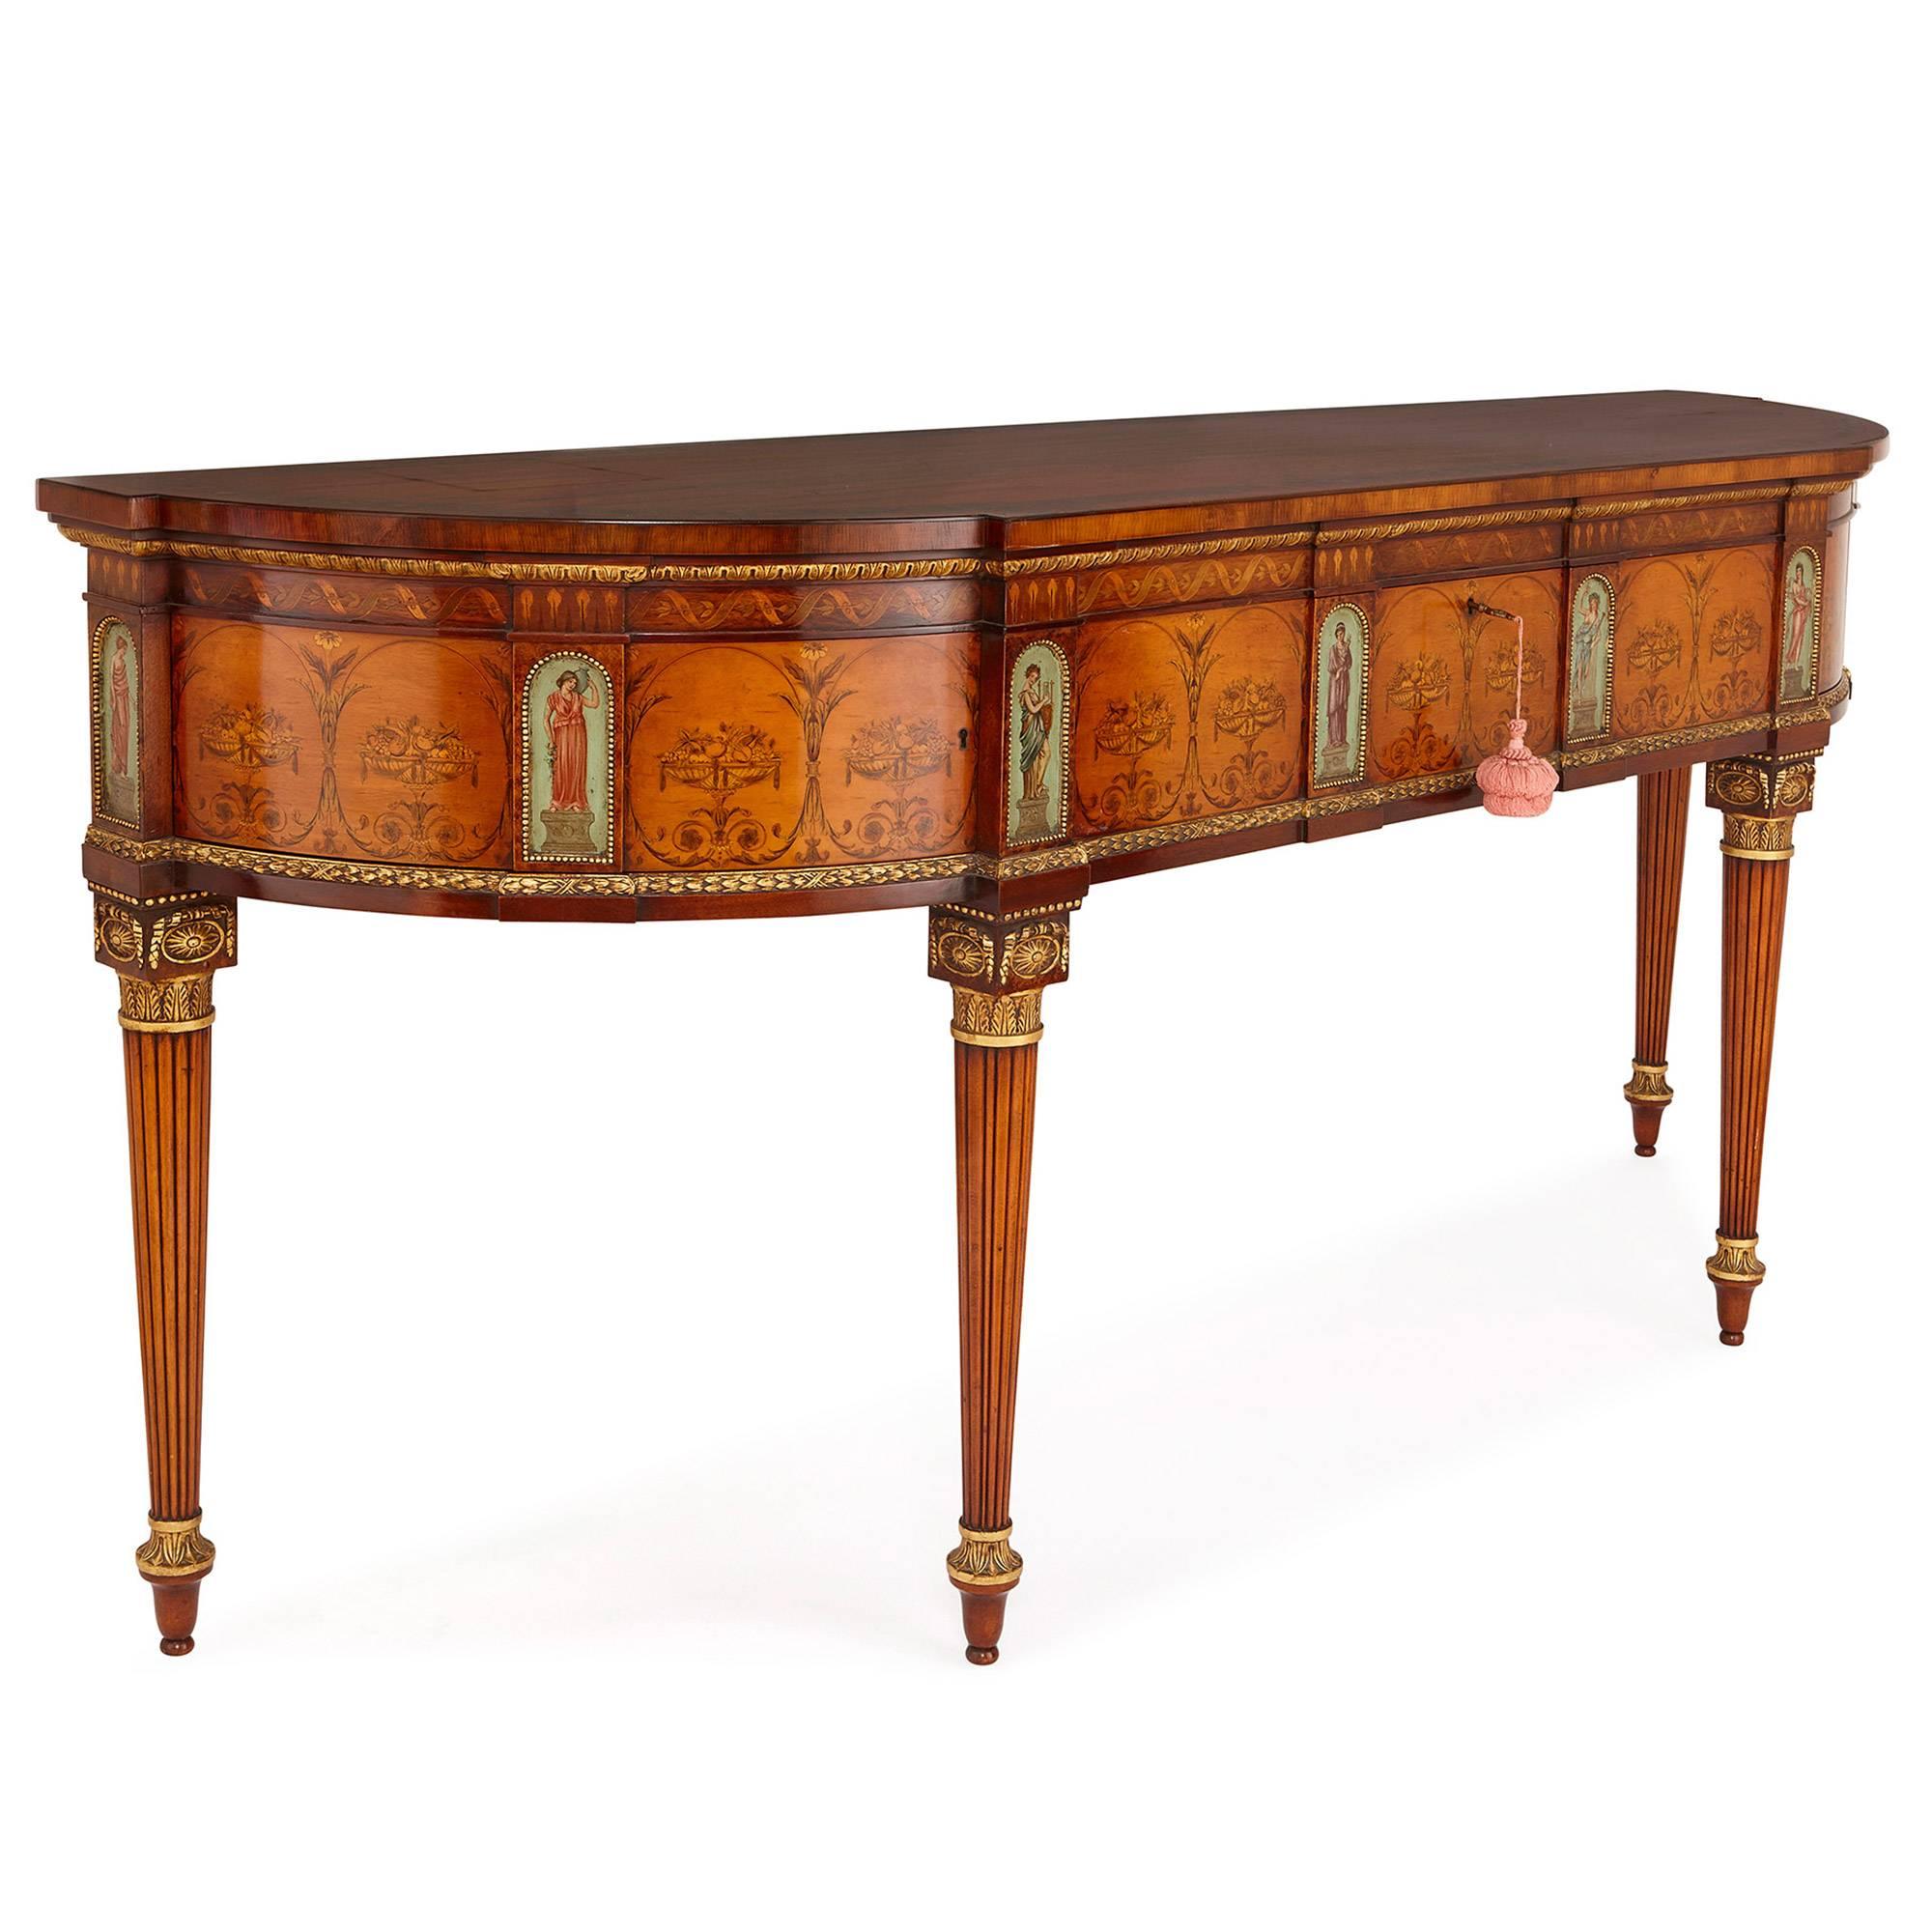 This fine and large sideboard, or console table, commands attention, and yet exudes both the grace and the refined elegance of the neoclassical style, which has enjoyed continued revivals in England from the 18th century onward. This particular